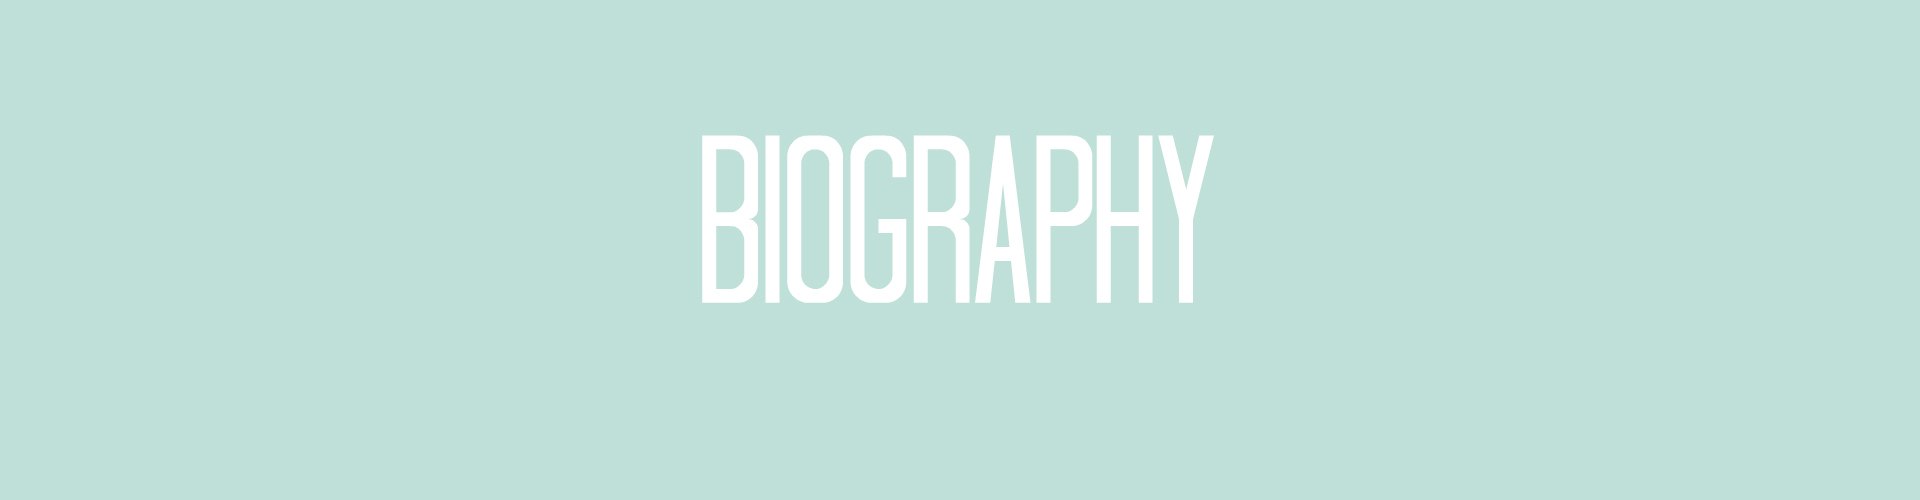 Biography page banner